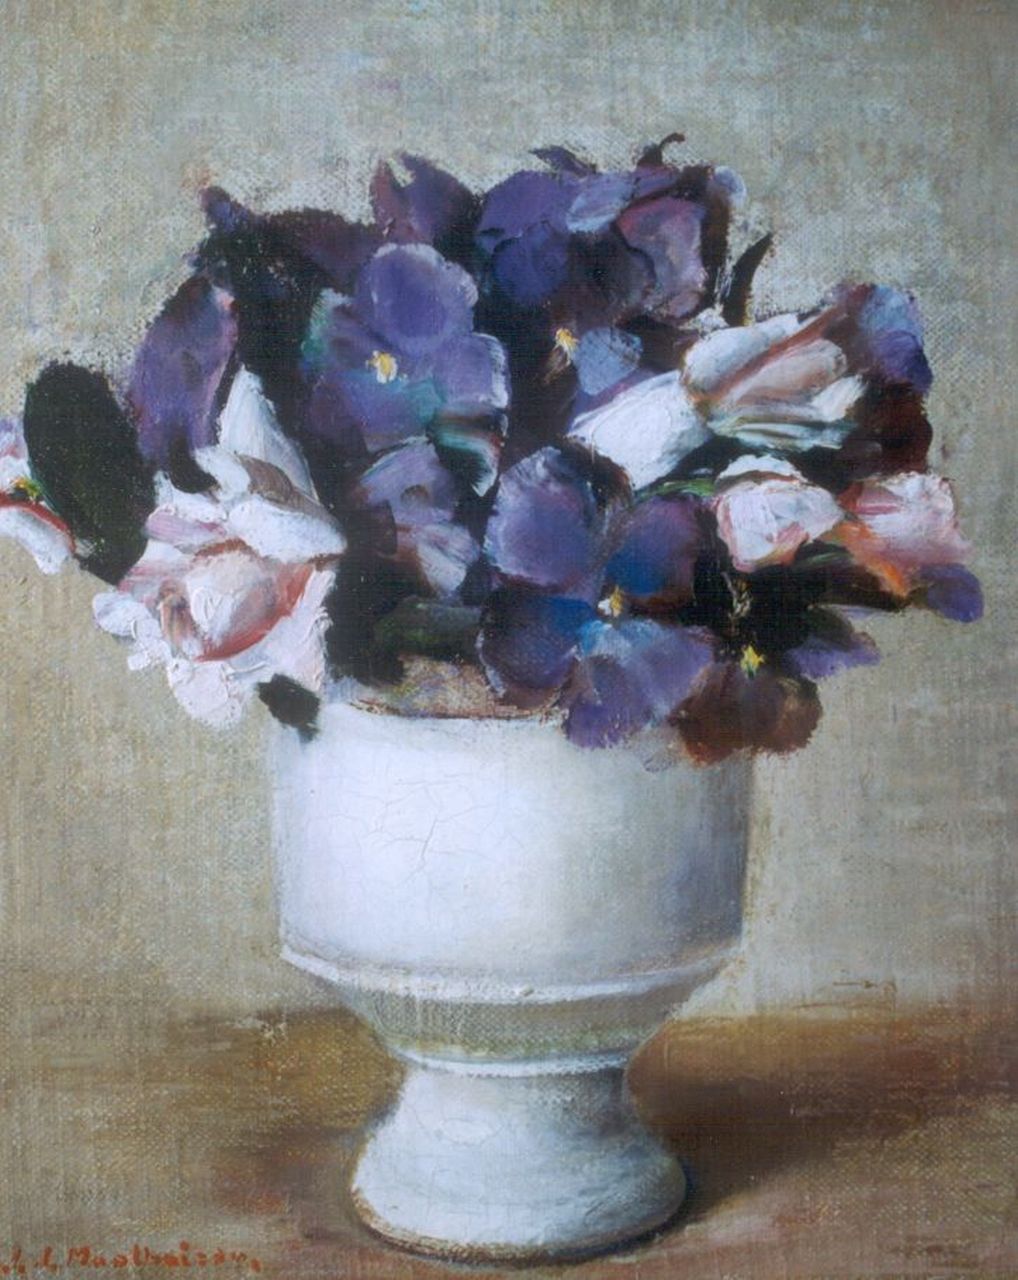 Moolhuizen J.J.  | Jan Jurriën Moolhuizen, A still life with violets and roses, oil on canvas laid down on panel 29.0 x 23.6 cm, signed l.l.